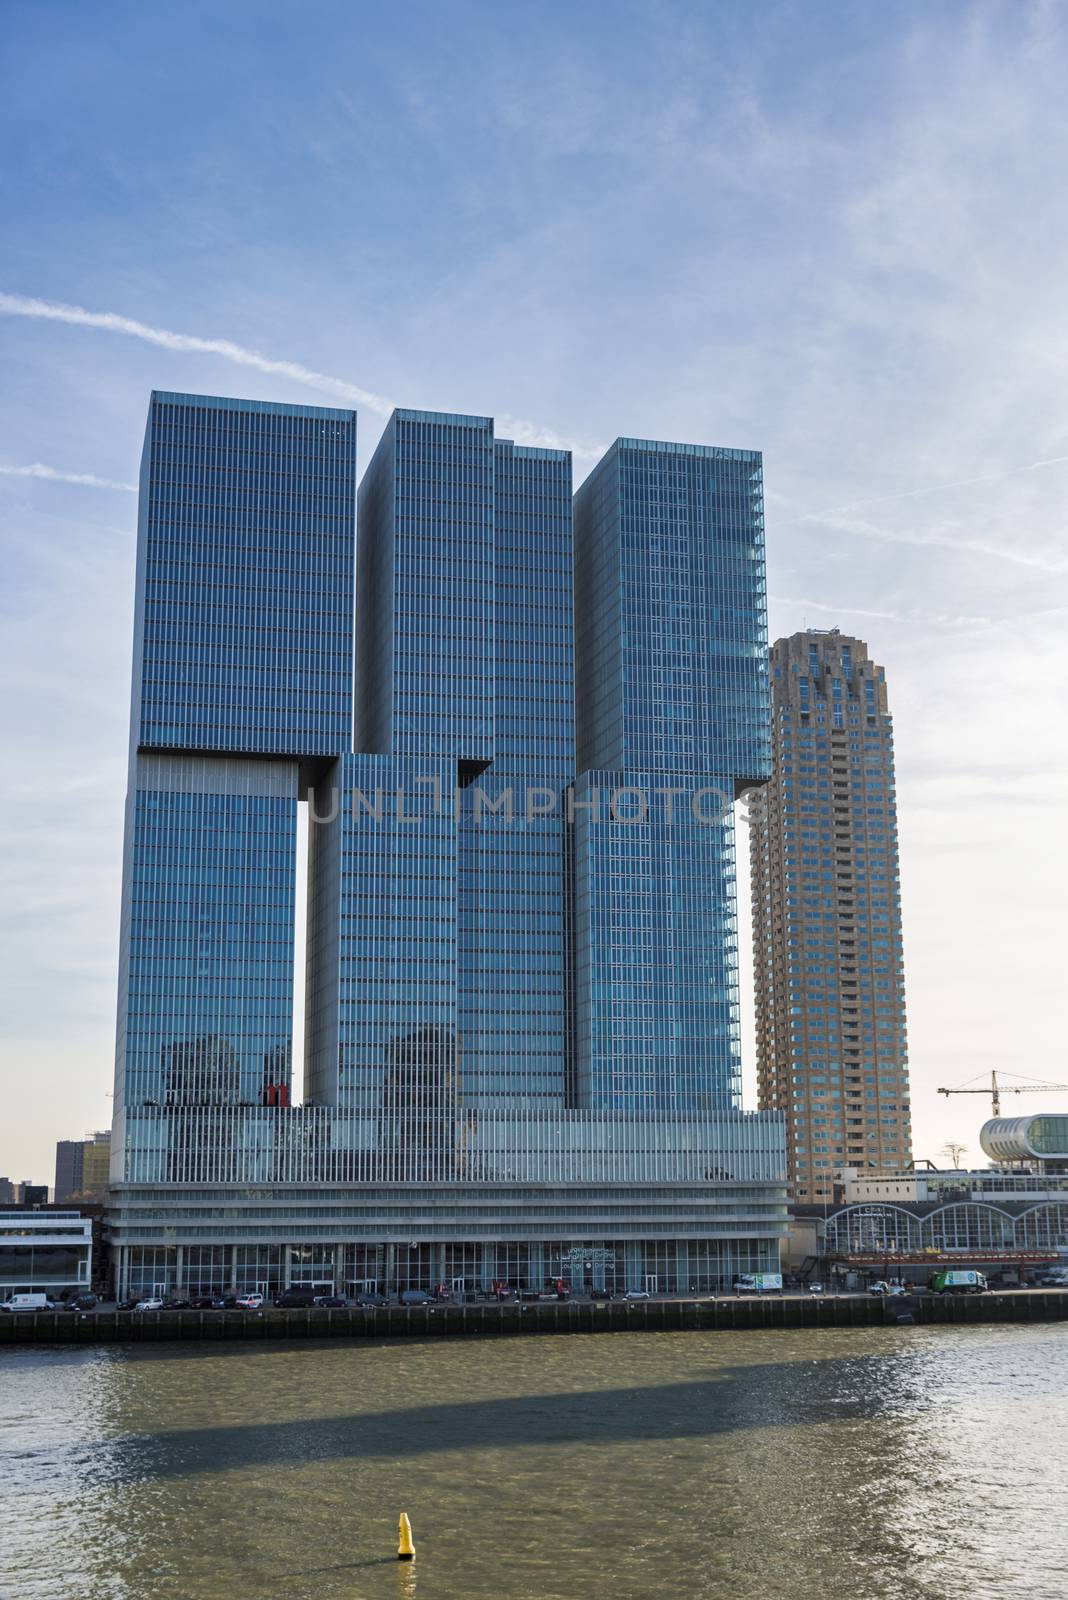 View over Maashaven towards De Rotterdam and KPN Tower buildings, Rotterdam, South Holland, The Netherlands